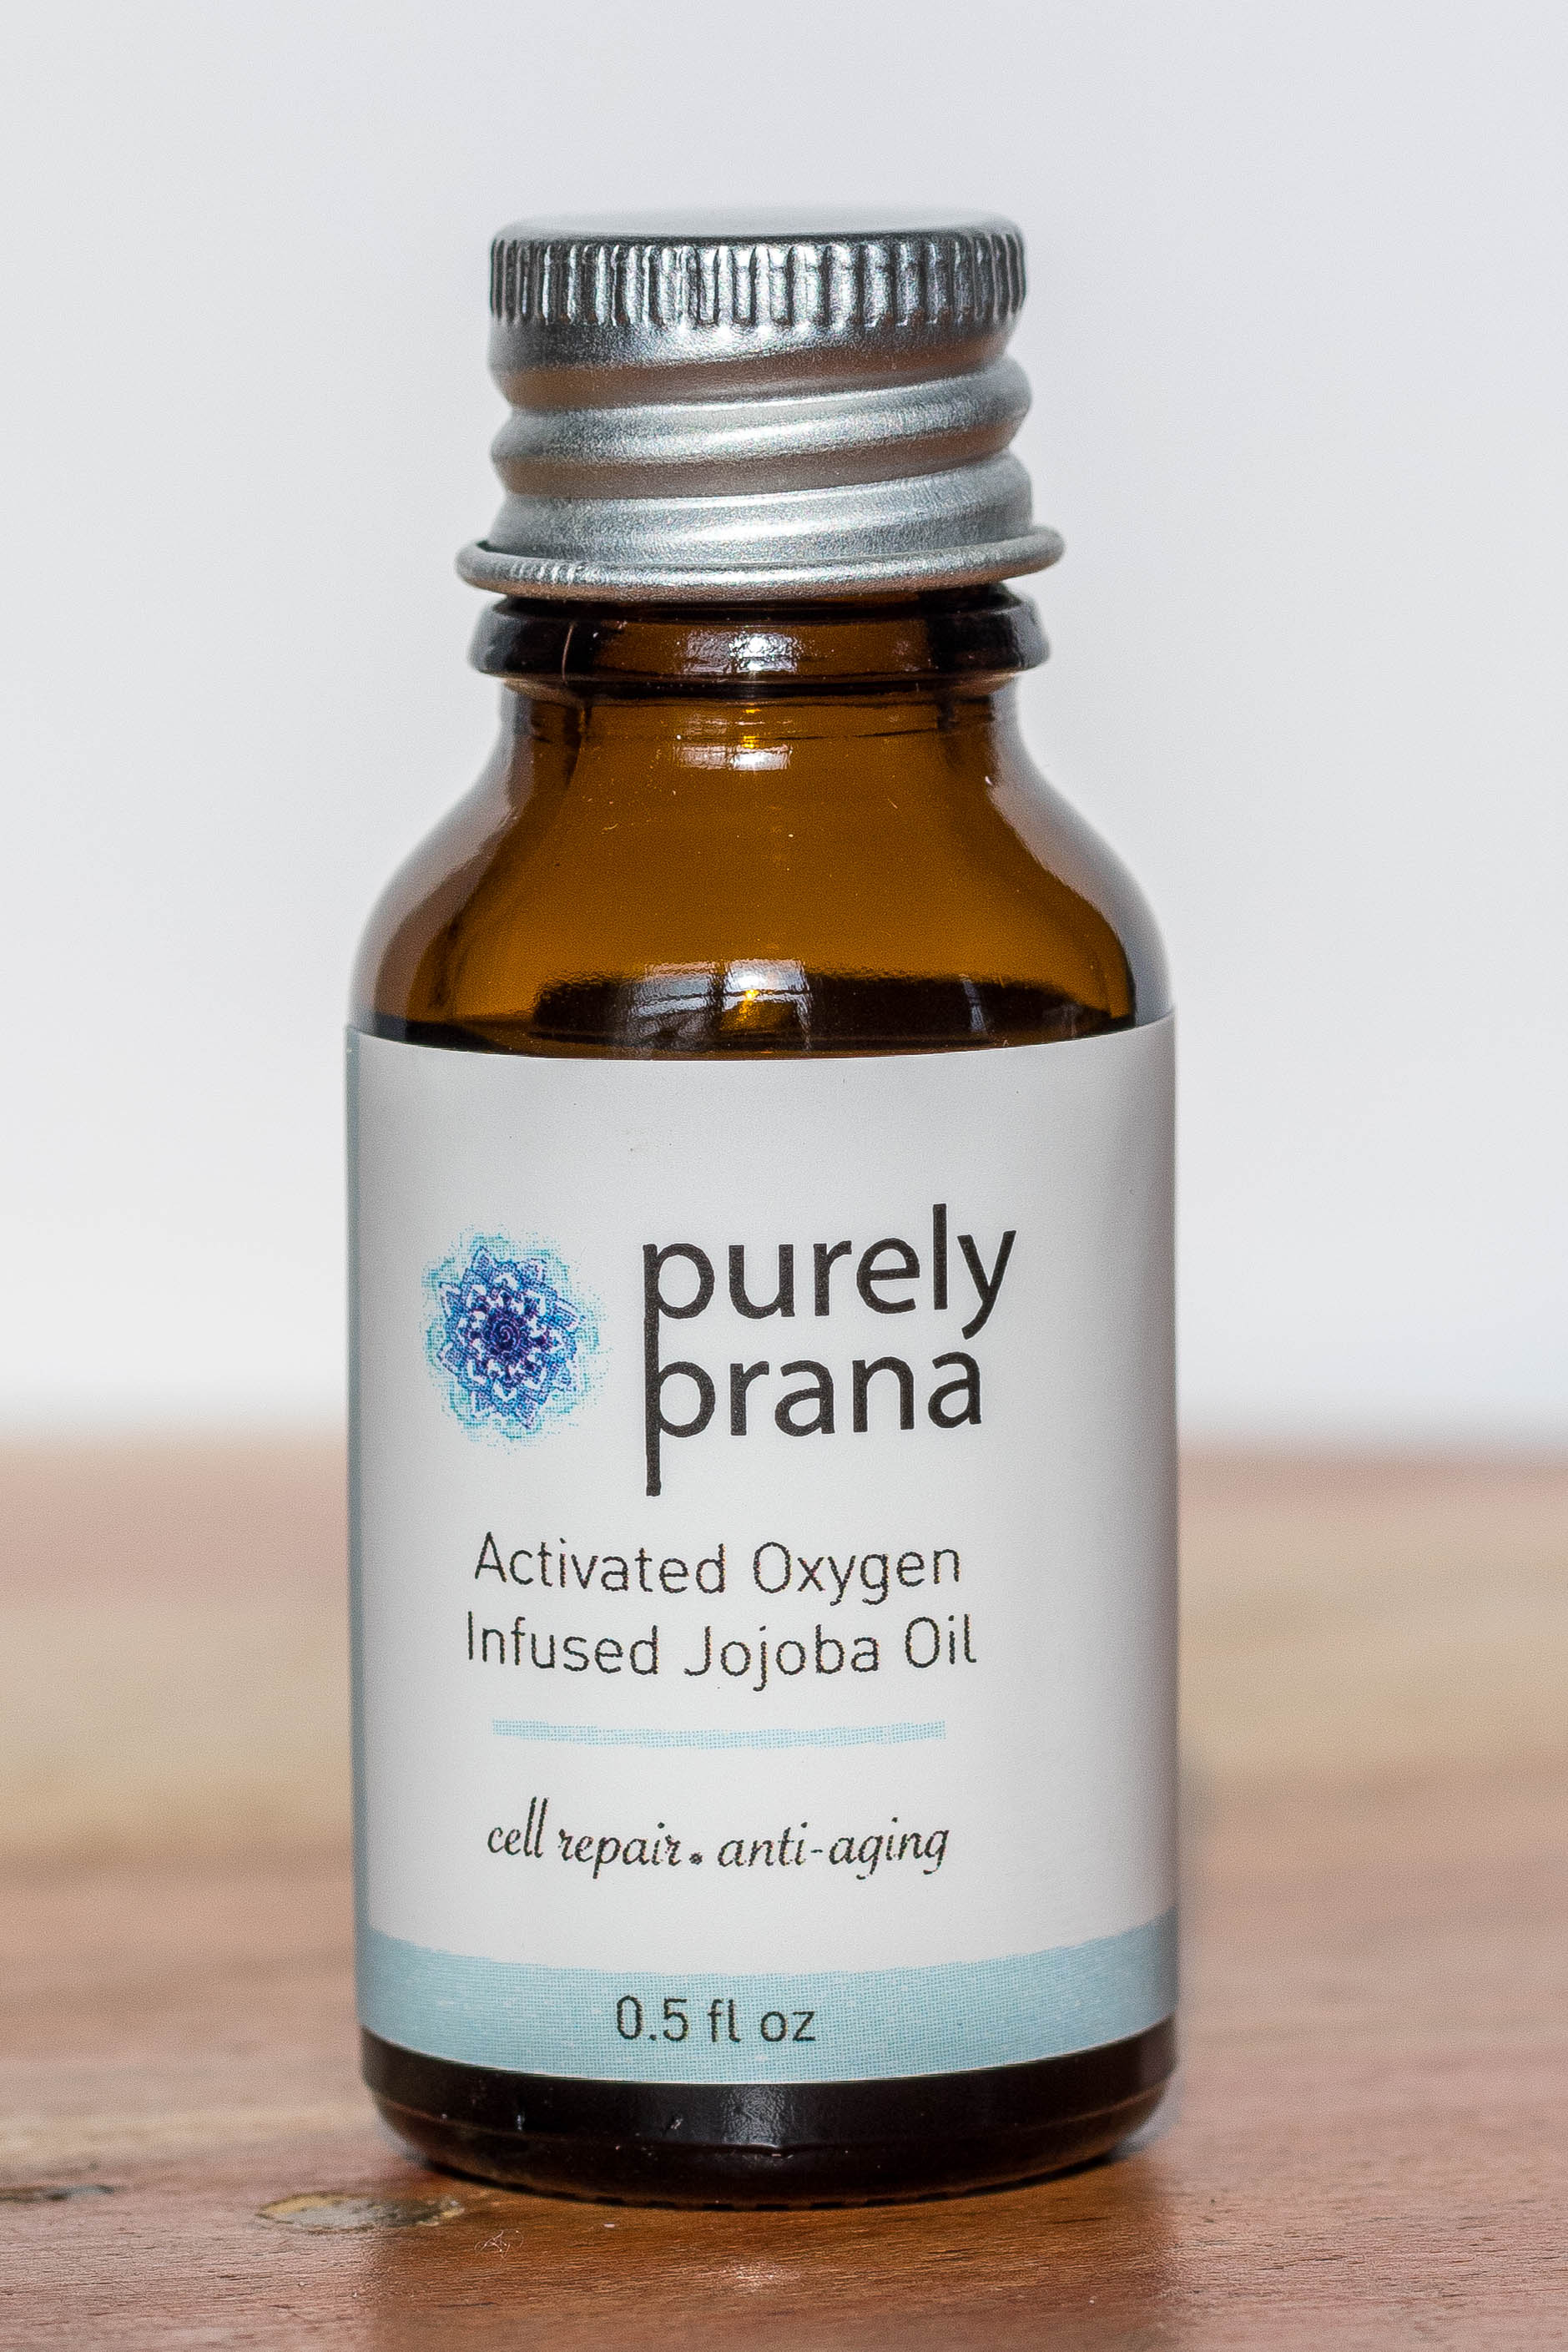 Activated Oxygen Infused Jojoba Oil